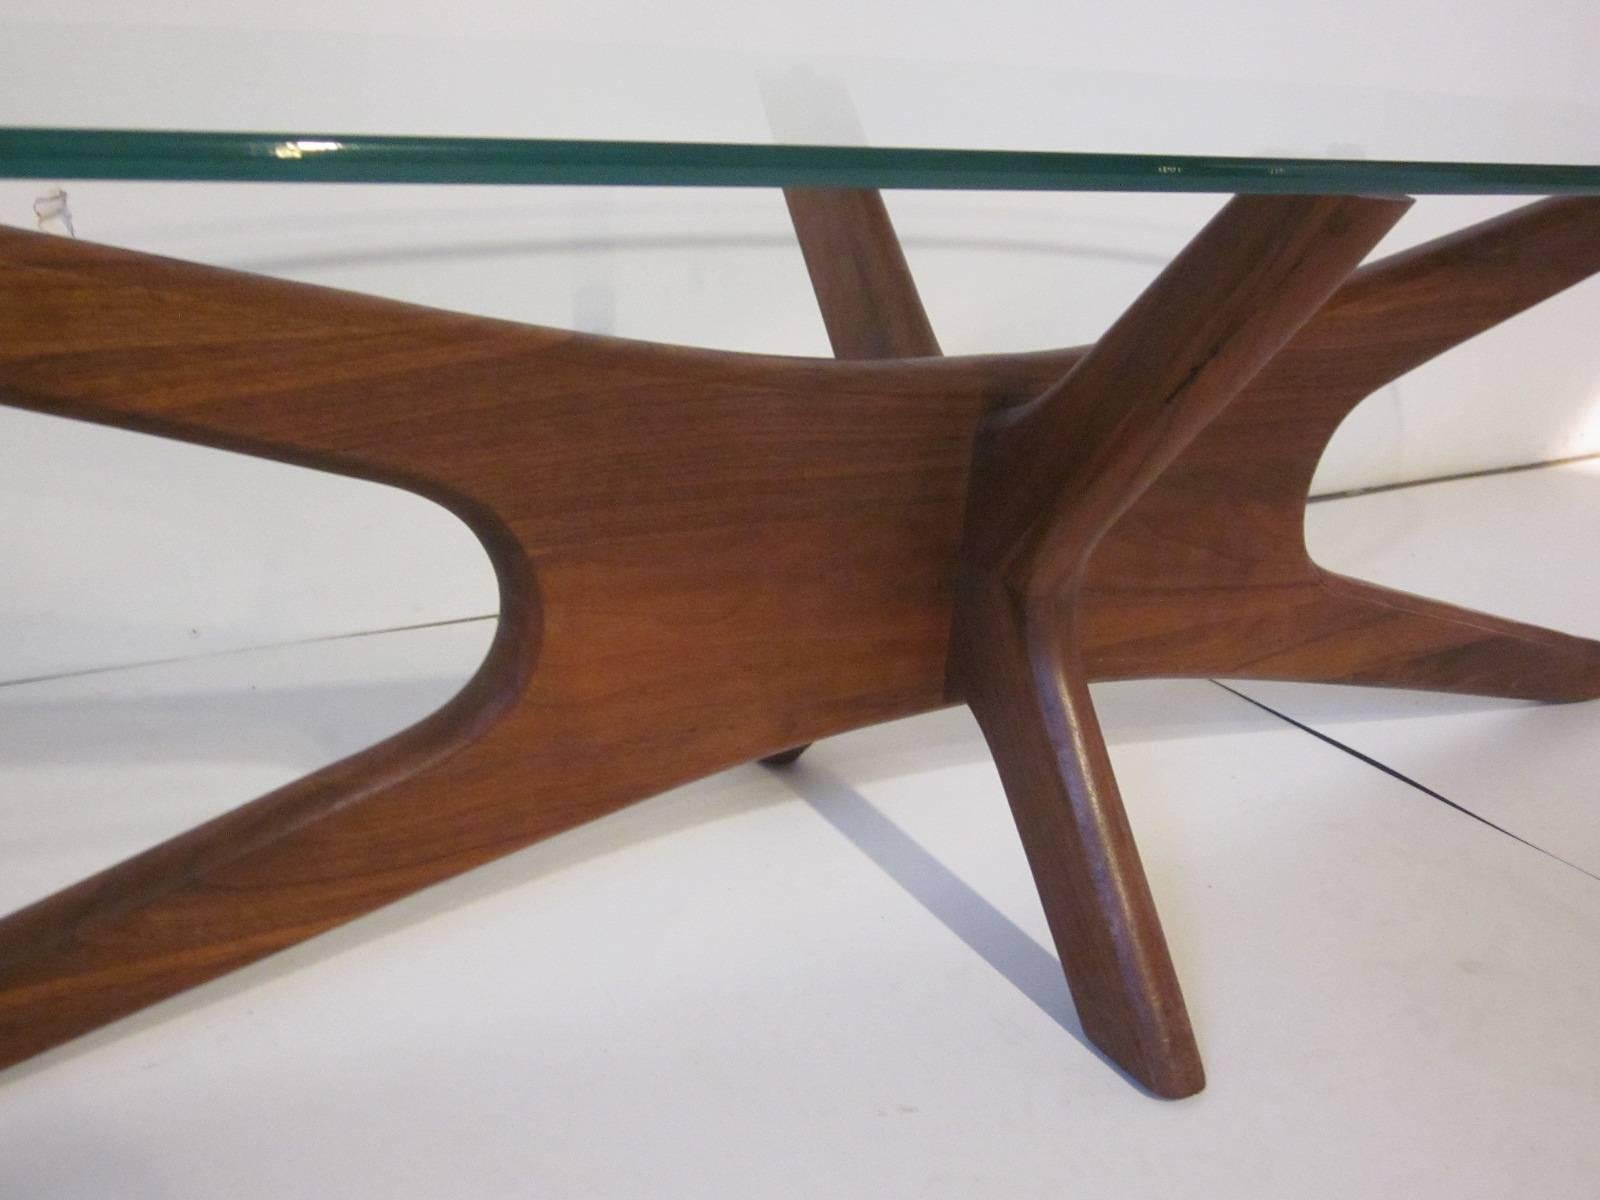 A Jacks coffee table with sculptural solid walnut base and oval styled glass top manufactured by Craft Associates.